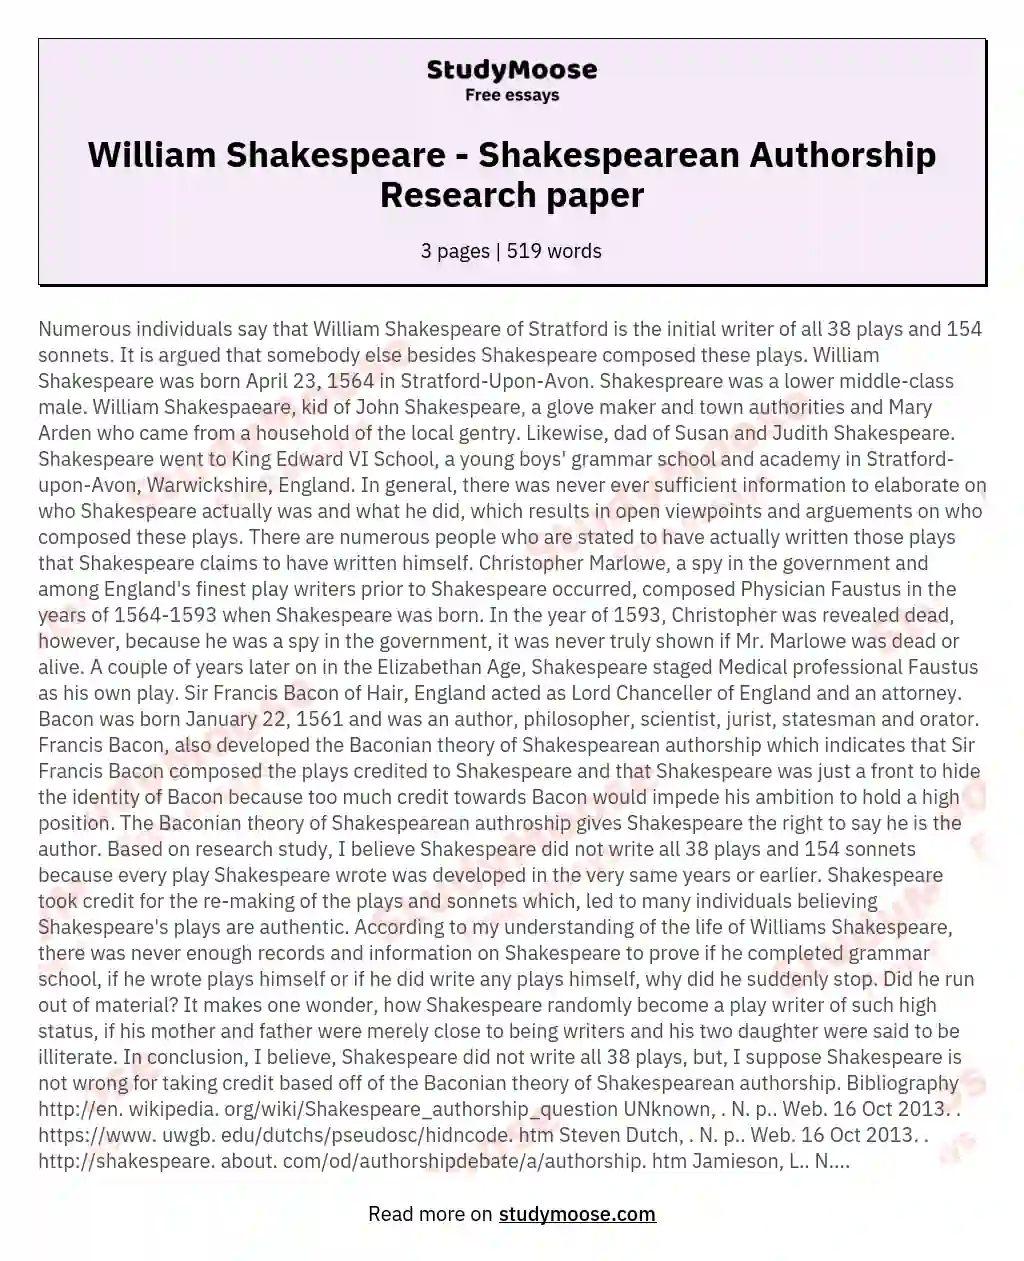 research paper topics about shakespeare's plays